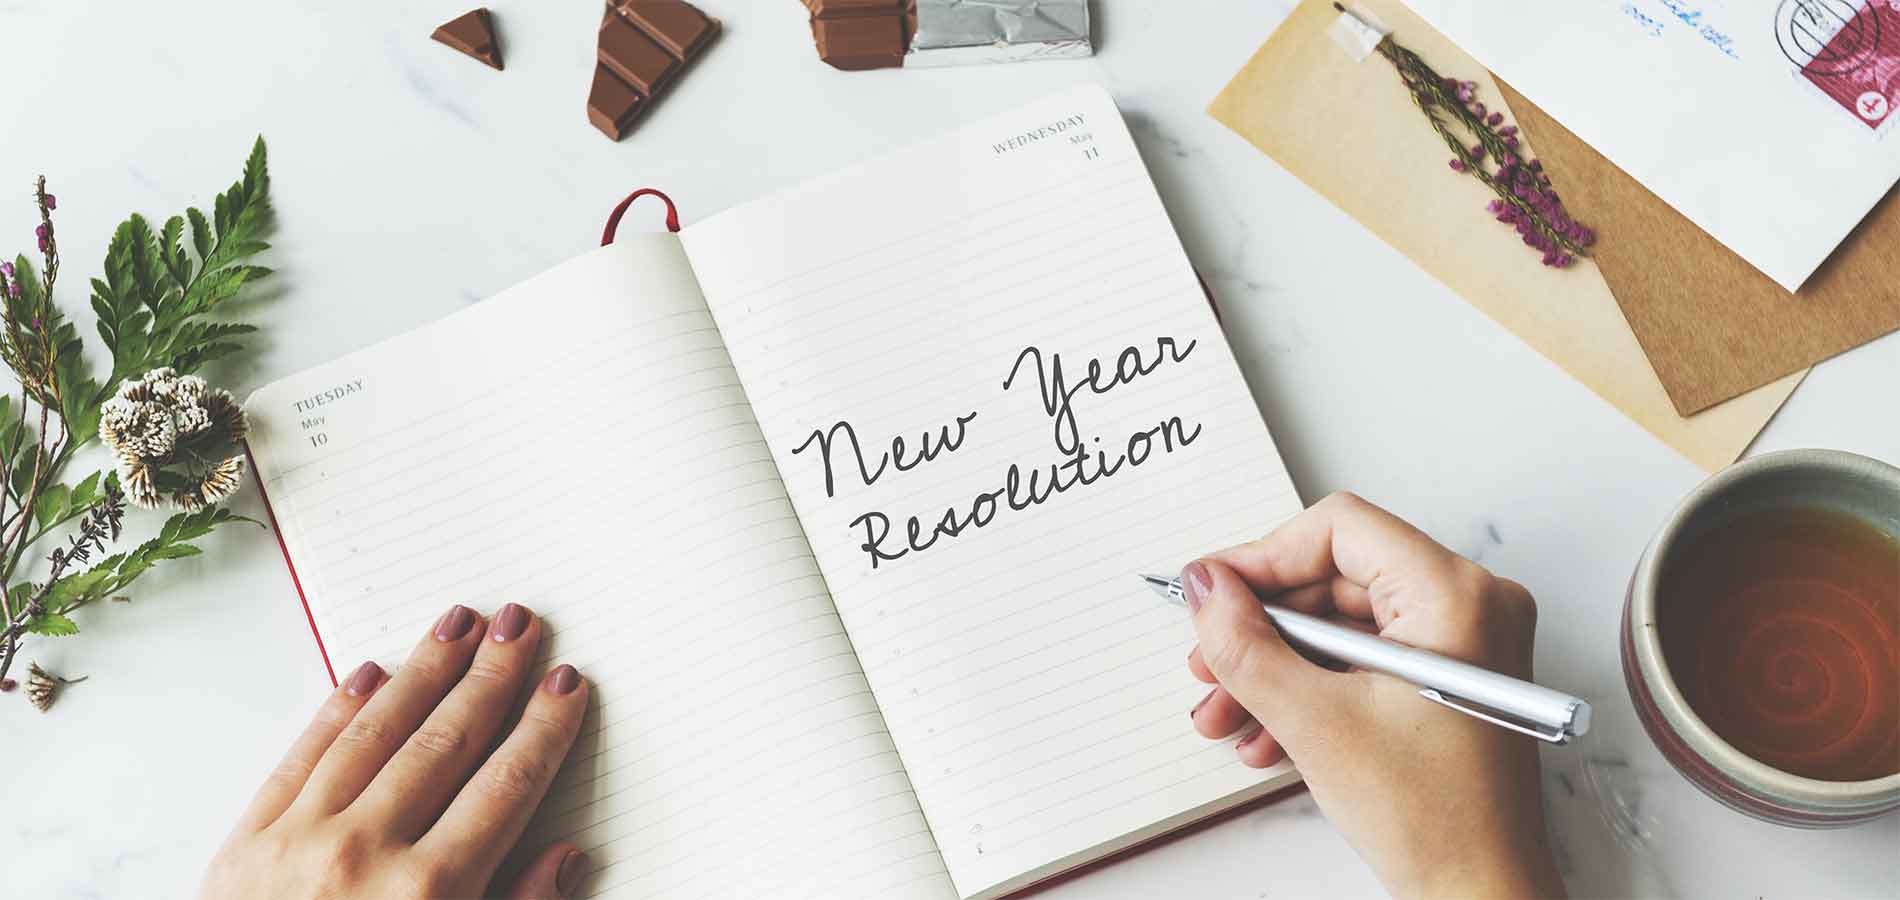 Five Good Financial Goals For Your New Year's Resolution